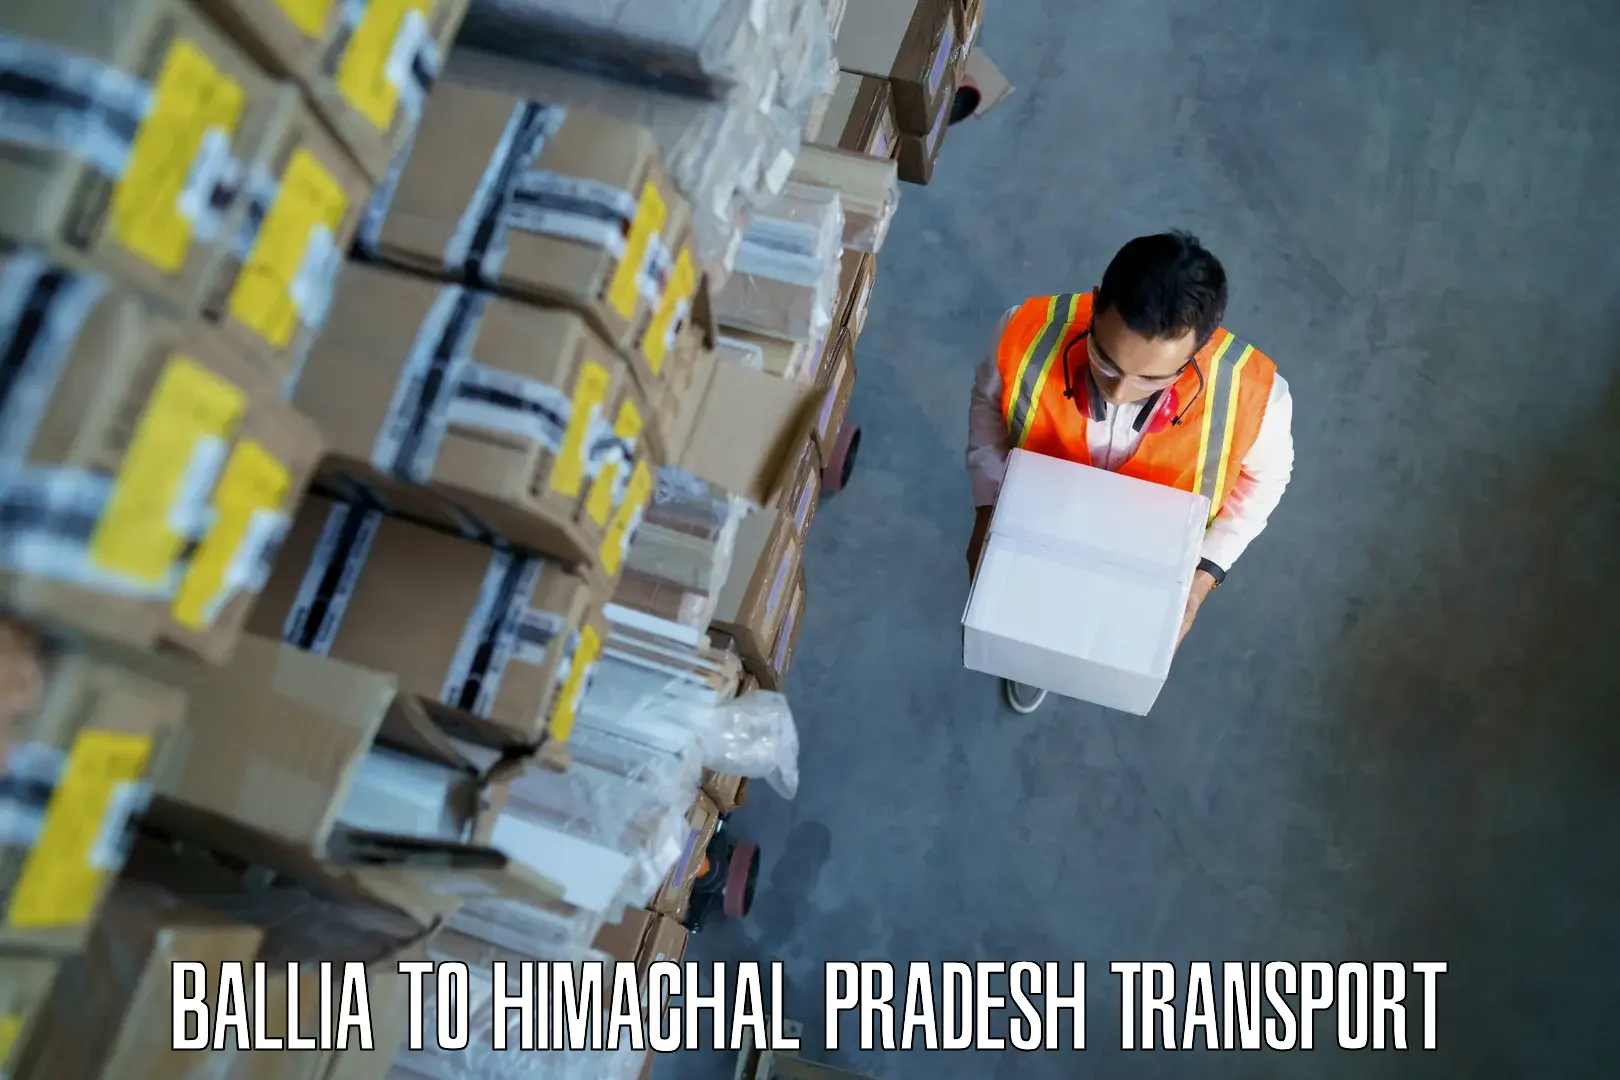 Daily parcel service transport Ballia to Bharmour